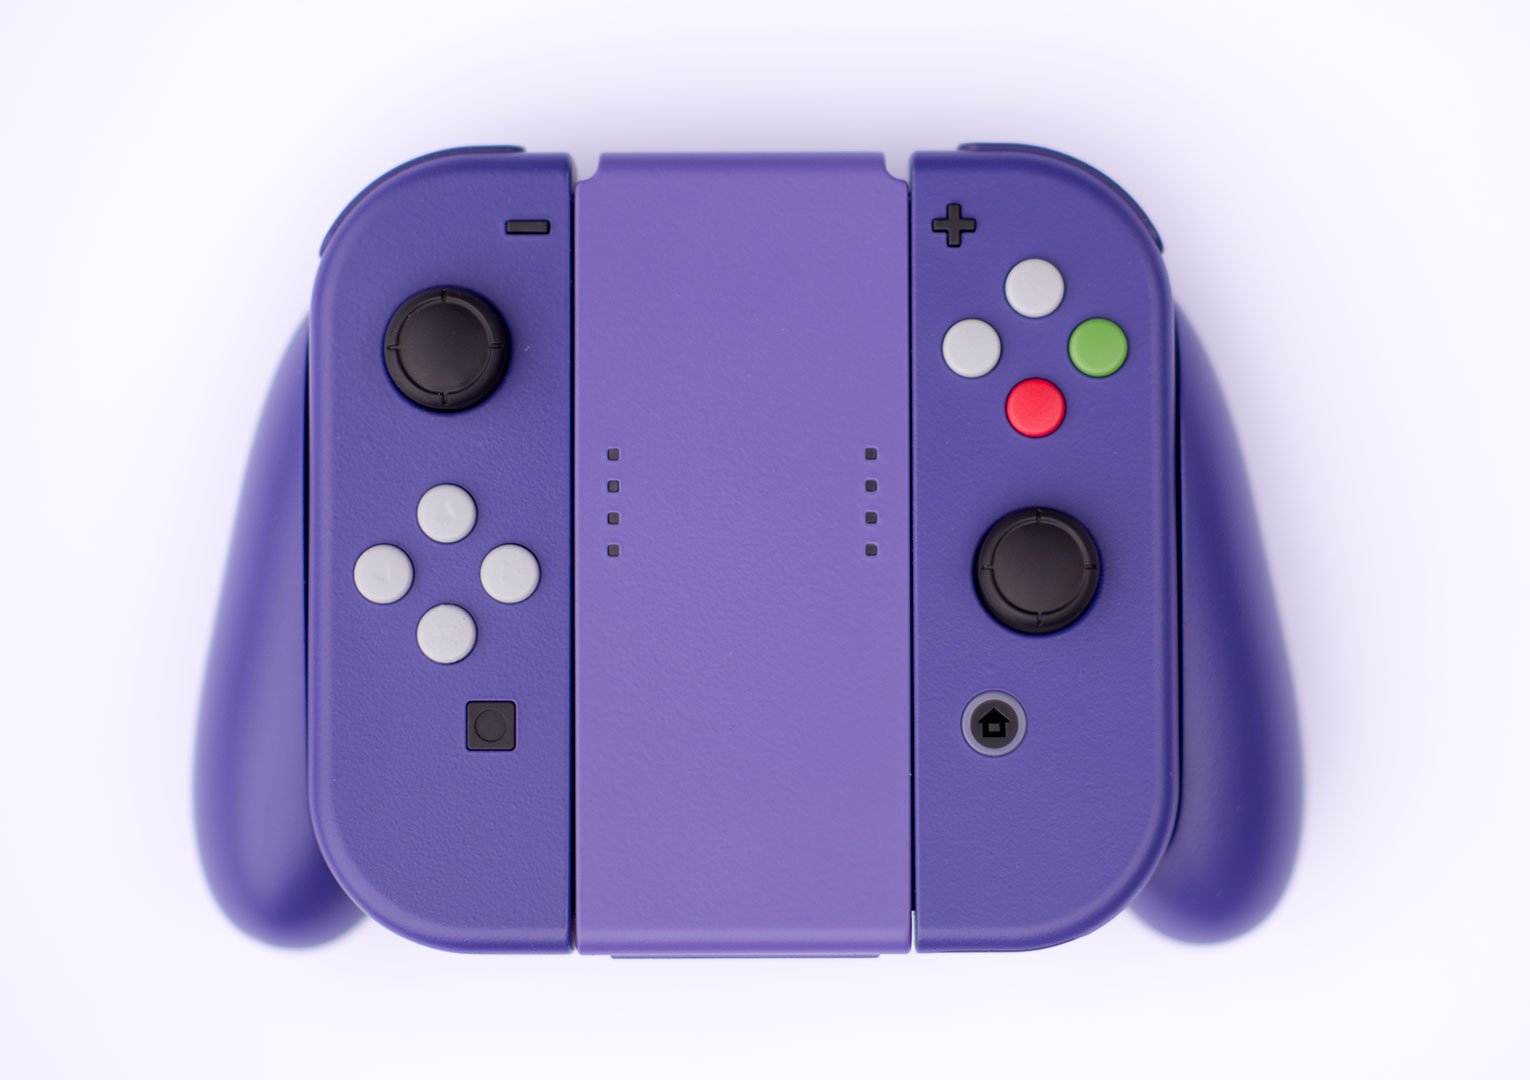 Behold The Majesty Of The GameCube-Styled Nintendo Switch Joy-Con